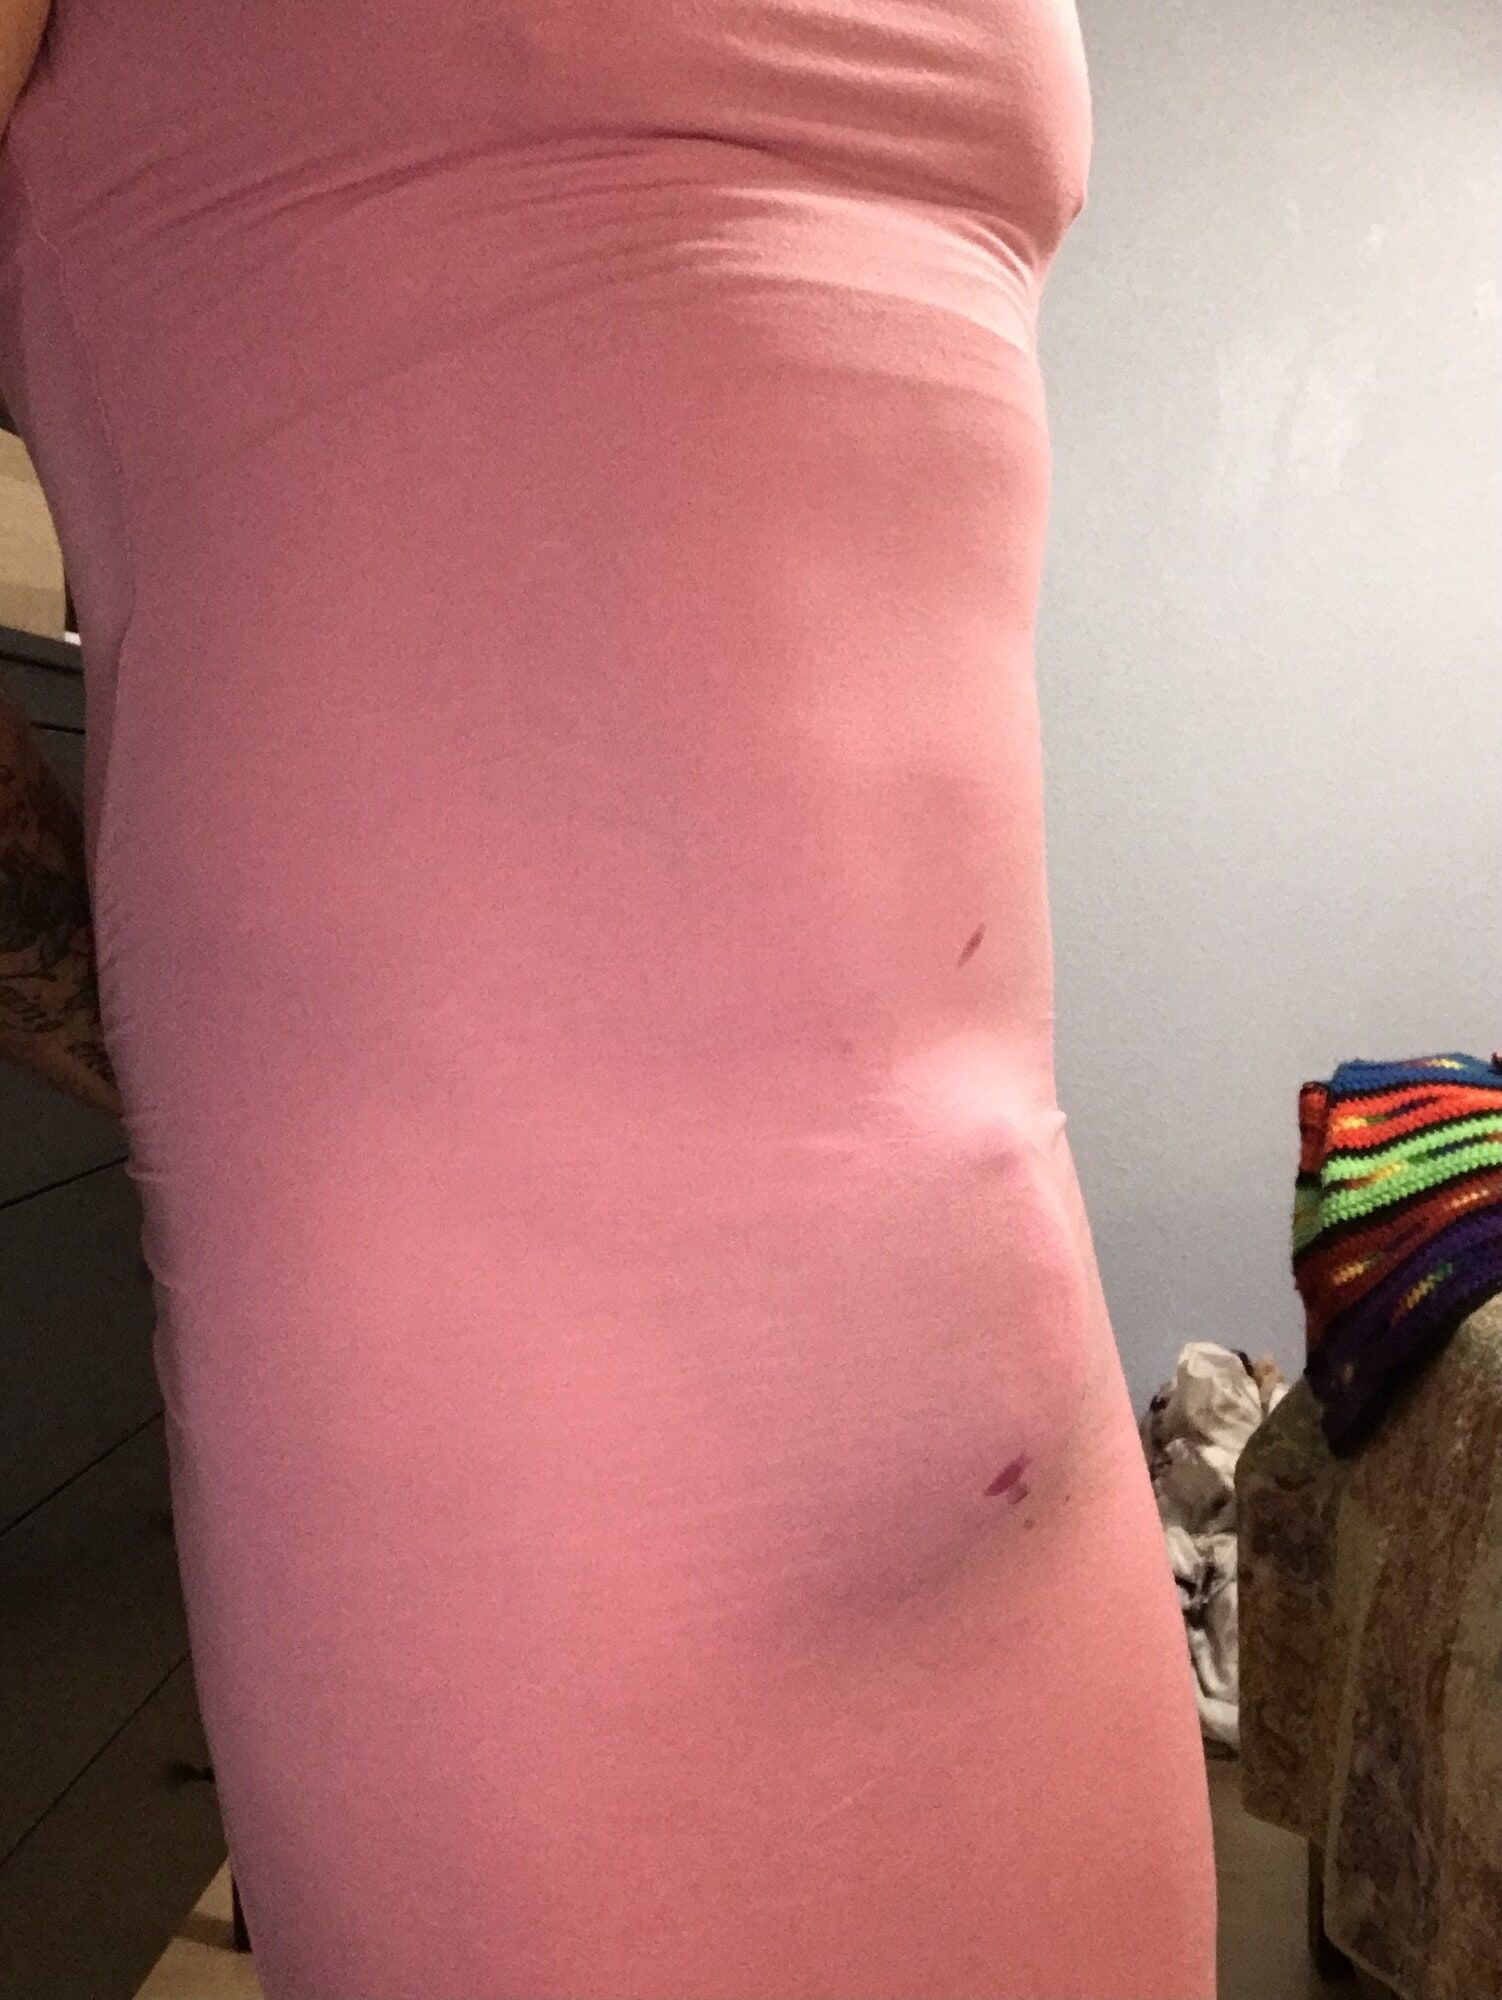 My lil bulge in some skirts #16